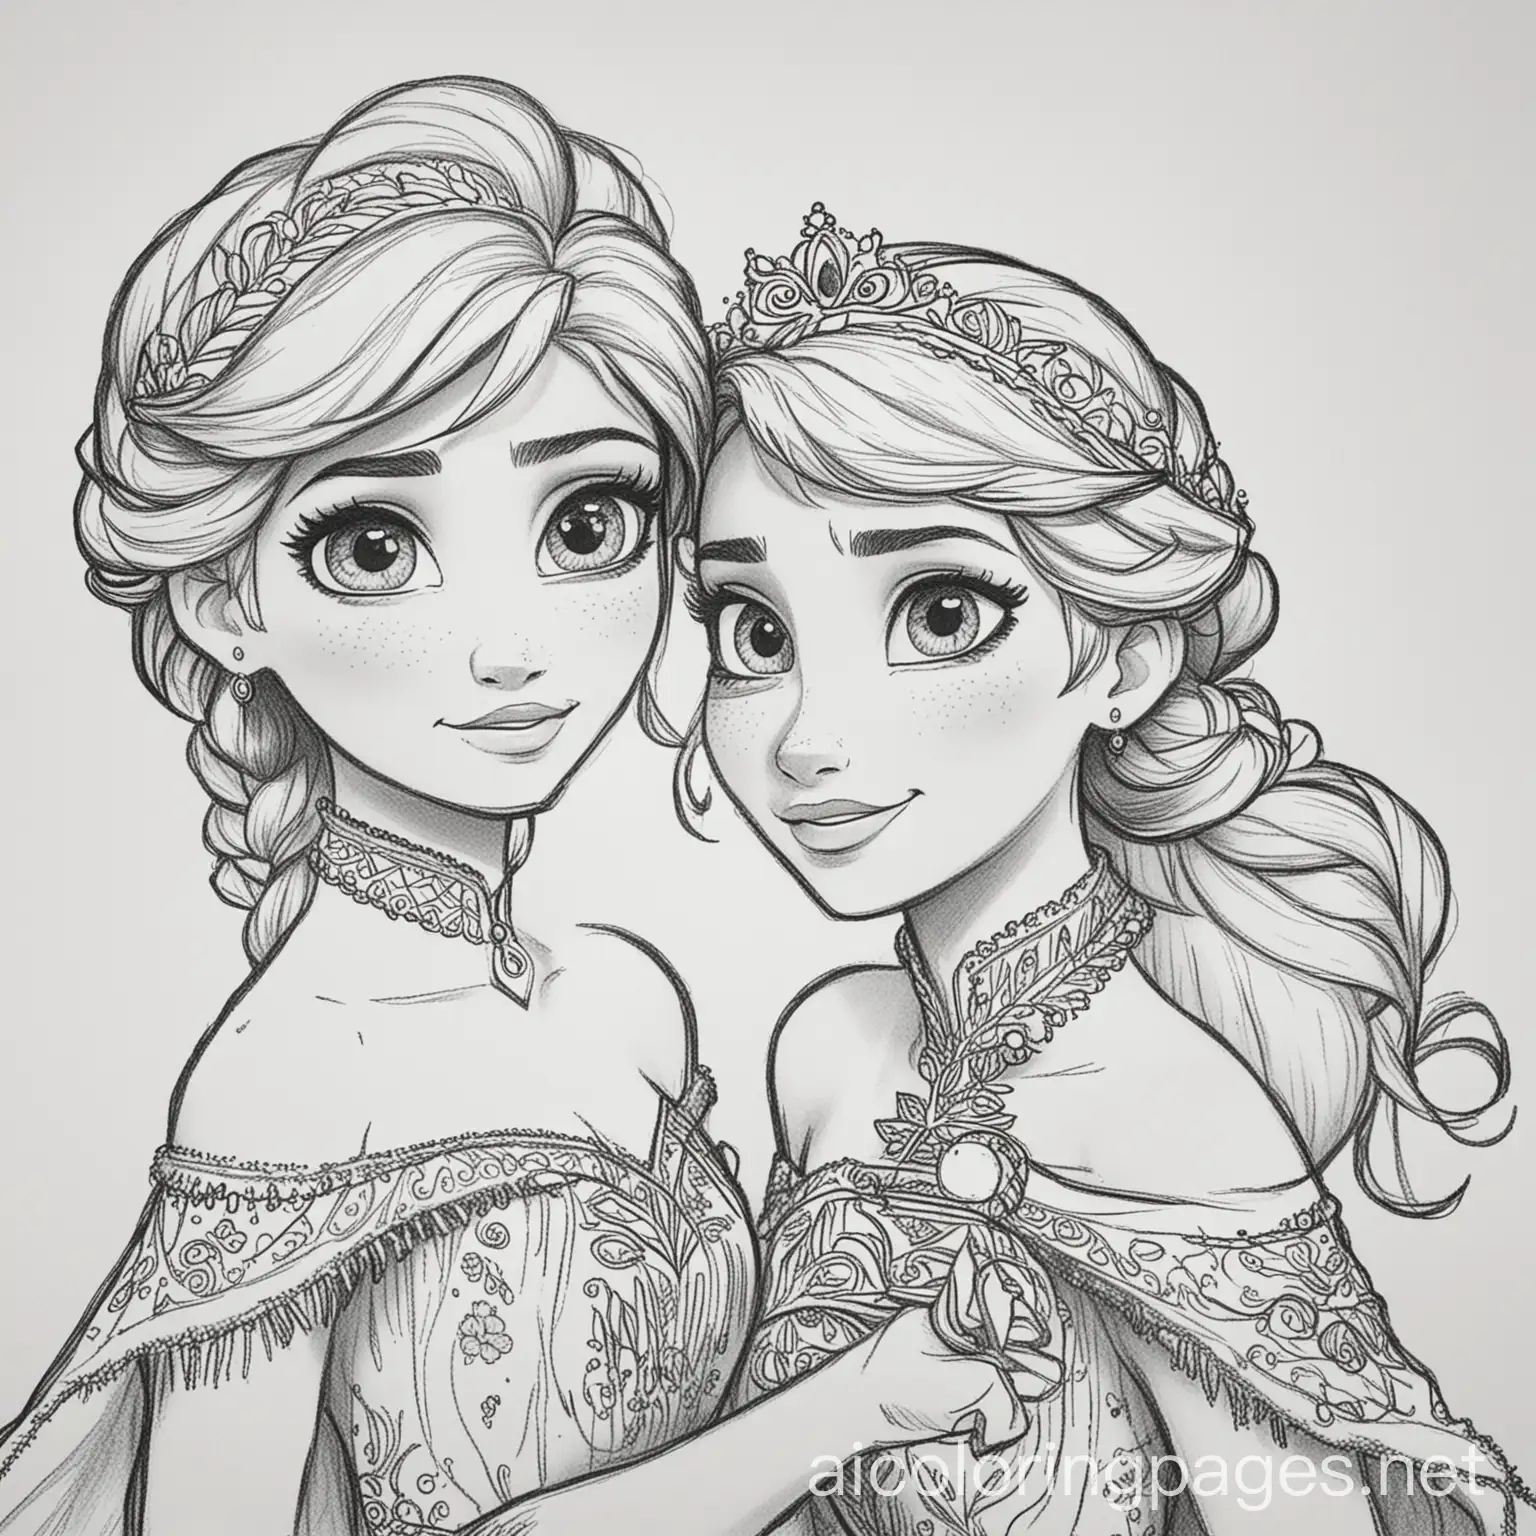 anna and elsa from frozen playing together black and white coloring page, Coloring Page, black and white, line art, white background, Simplicity, Ample White Space